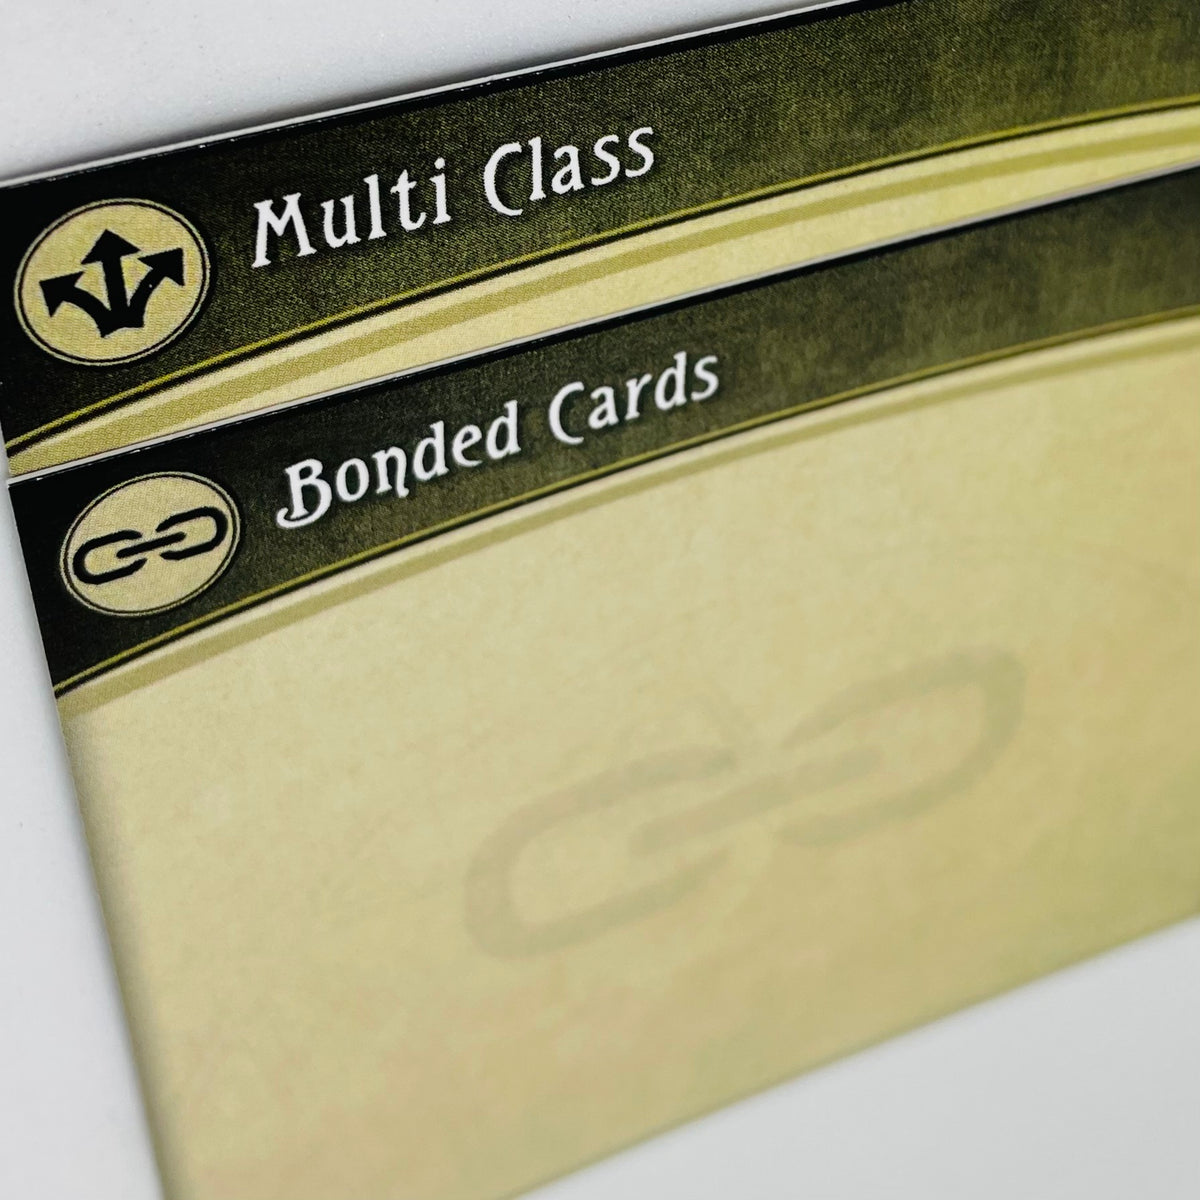 Multi Class & Bonded Card Dividers - For Arkham Horror LCG Deck Box Dividers